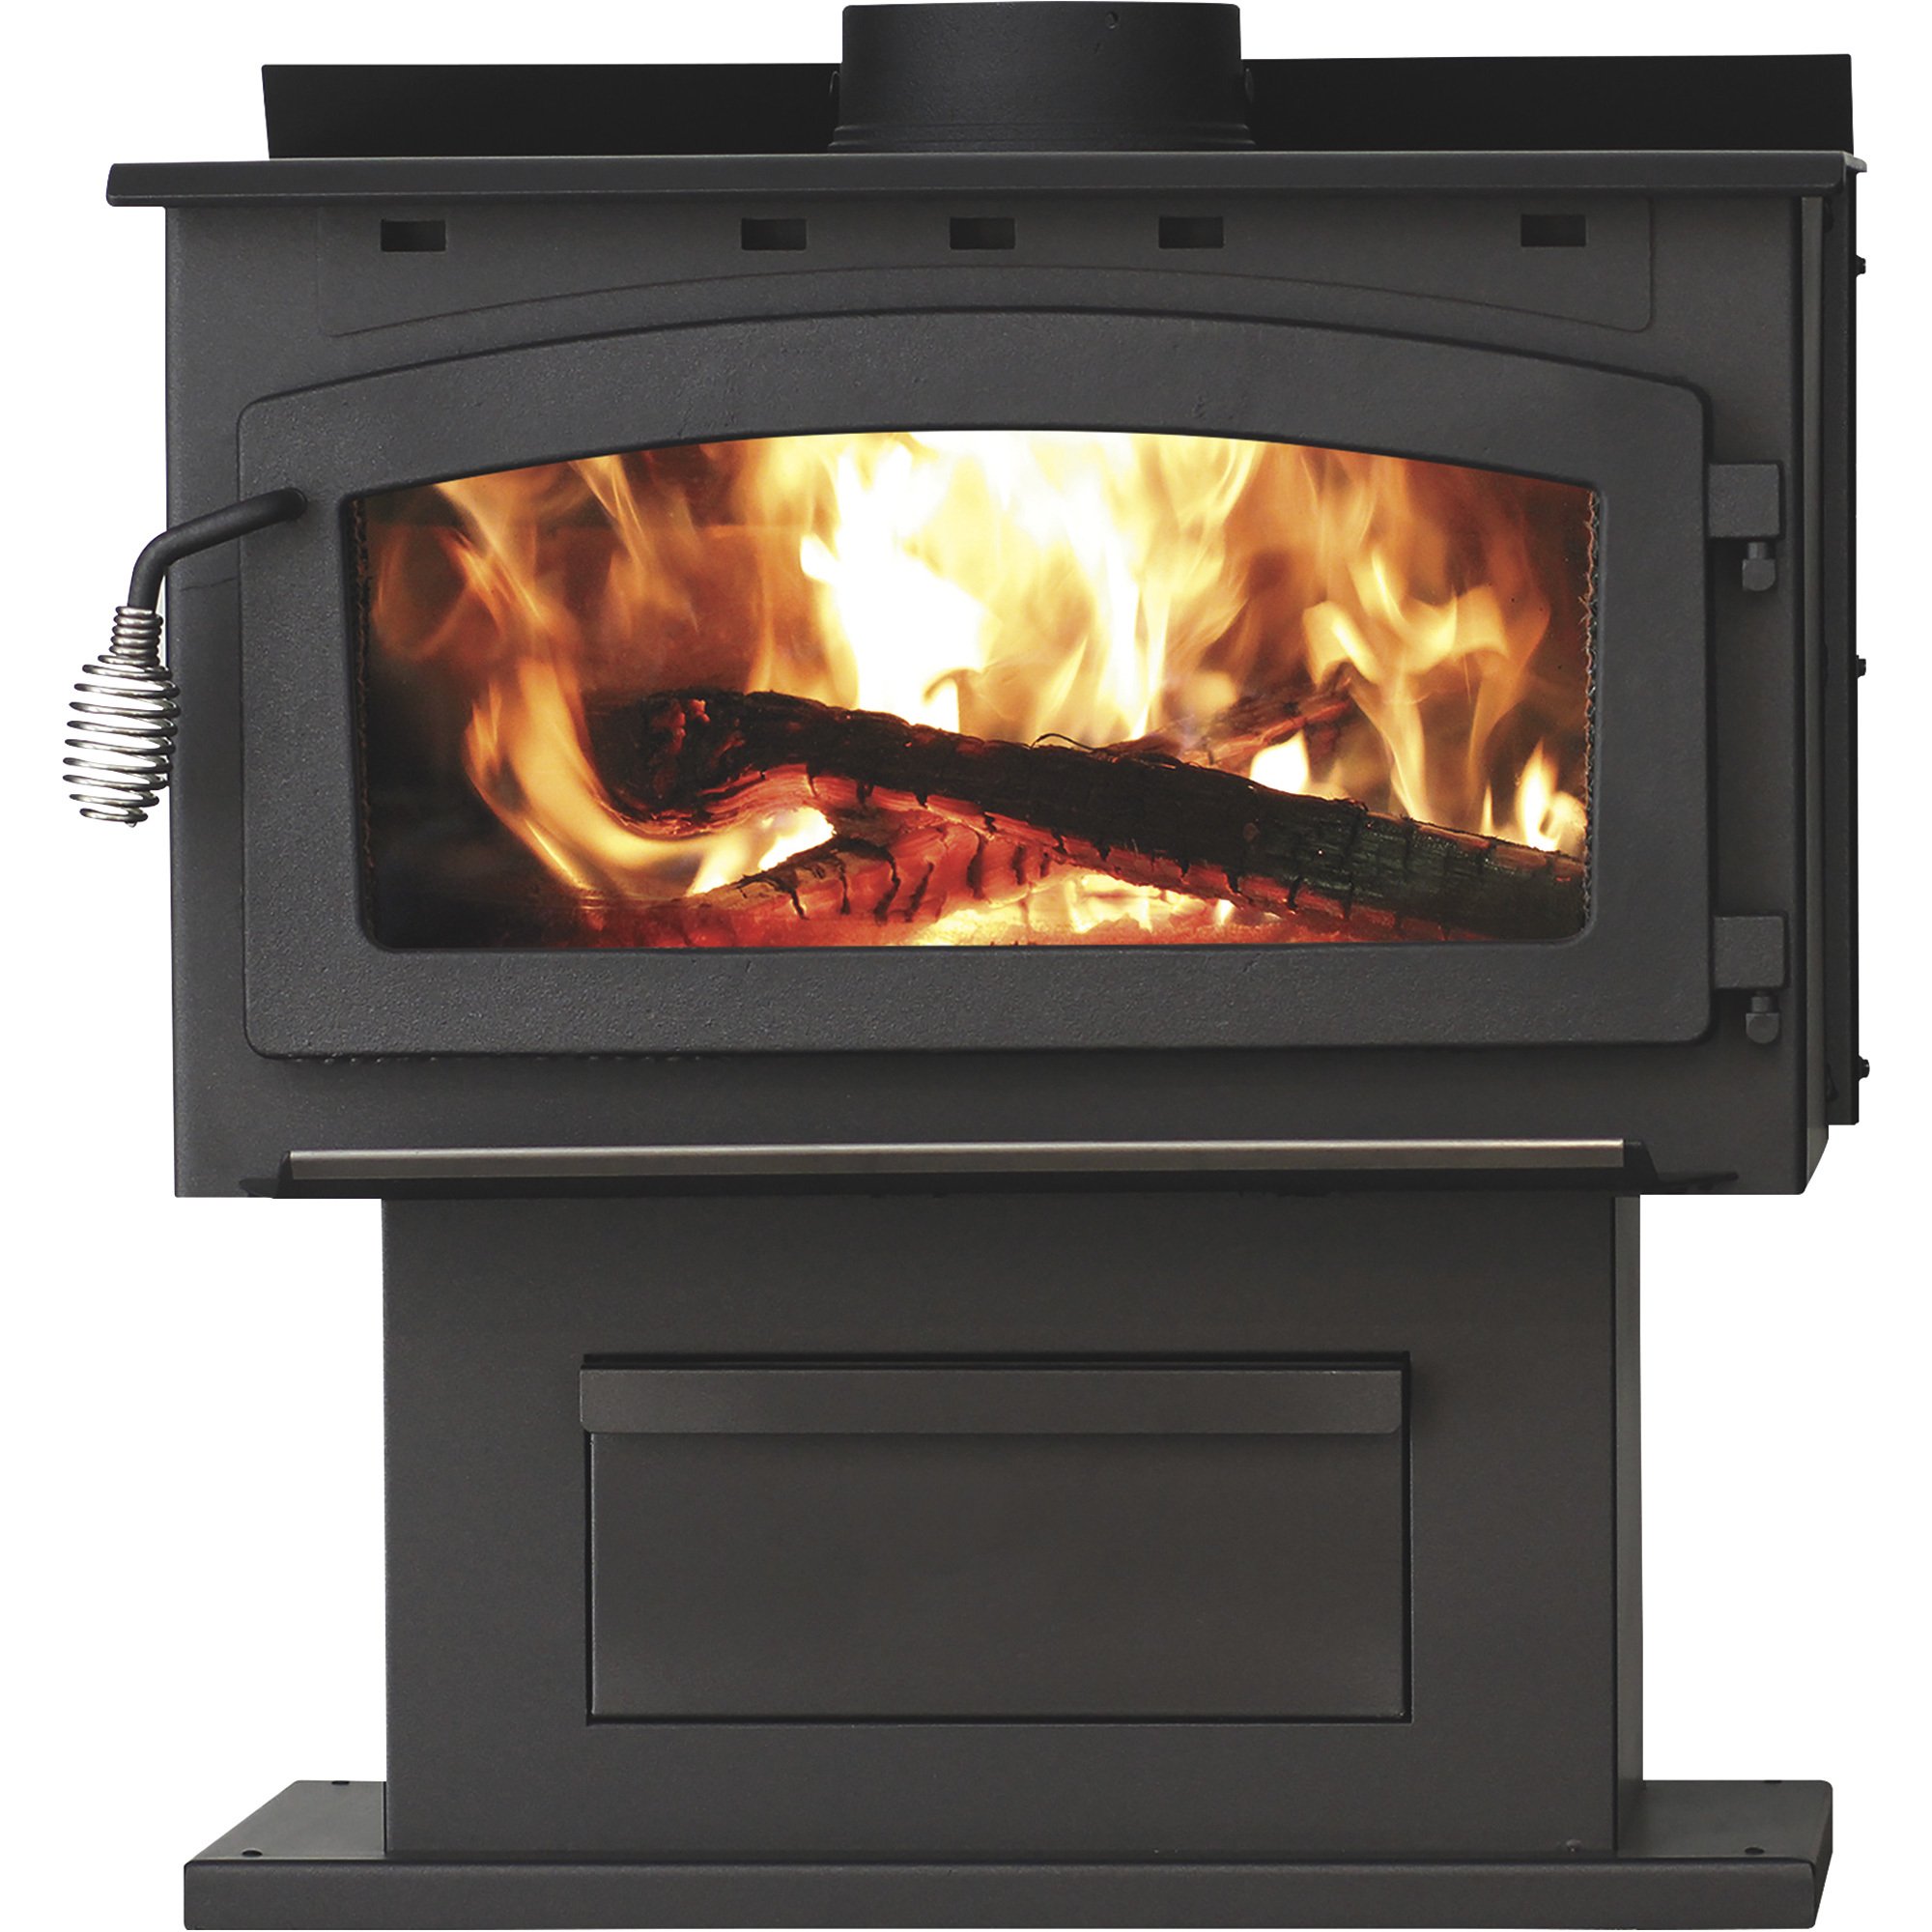 Craigslist Electric Fireplaces for Sale Unique Wood Burning Stoves Firepl.....